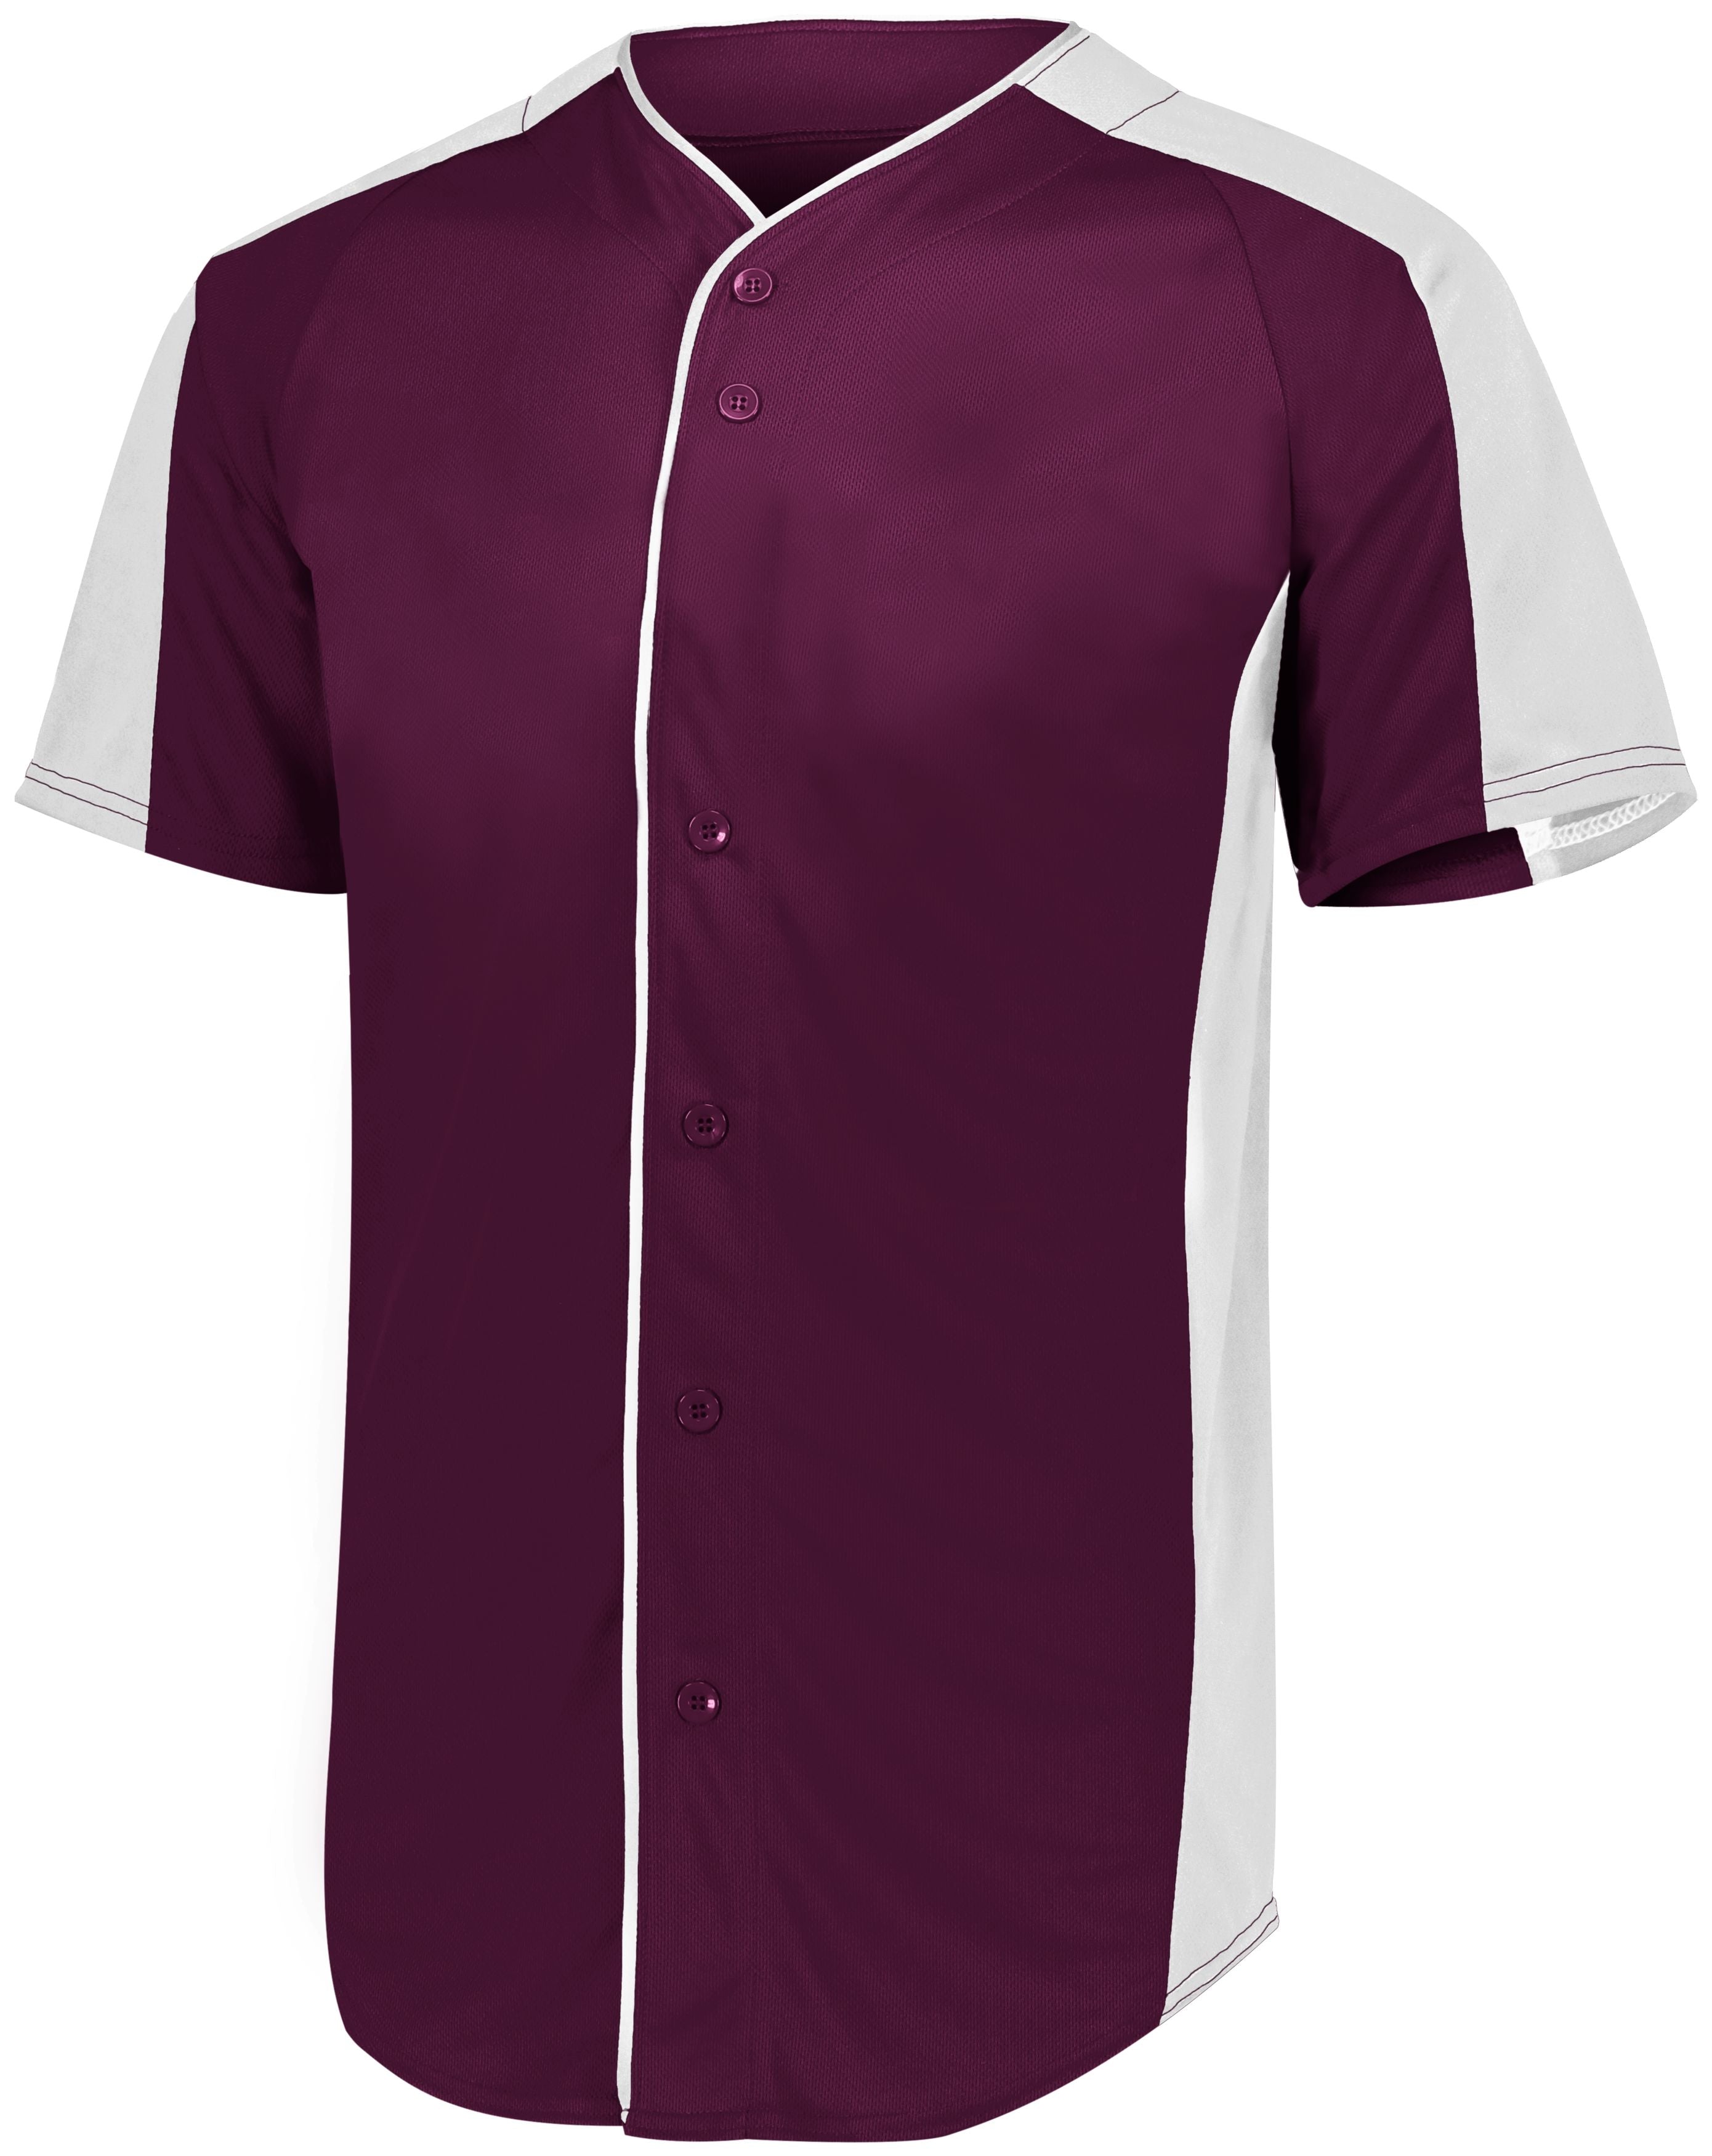 Augusta Sportswear Youth Full-Button Baseball Jersey in Maroon/White  -Part of the Youth, Youth-Jersey, Augusta-Products, Baseball, Shirts, All-Sports, All-Sports-1 product lines at KanaleyCreations.com